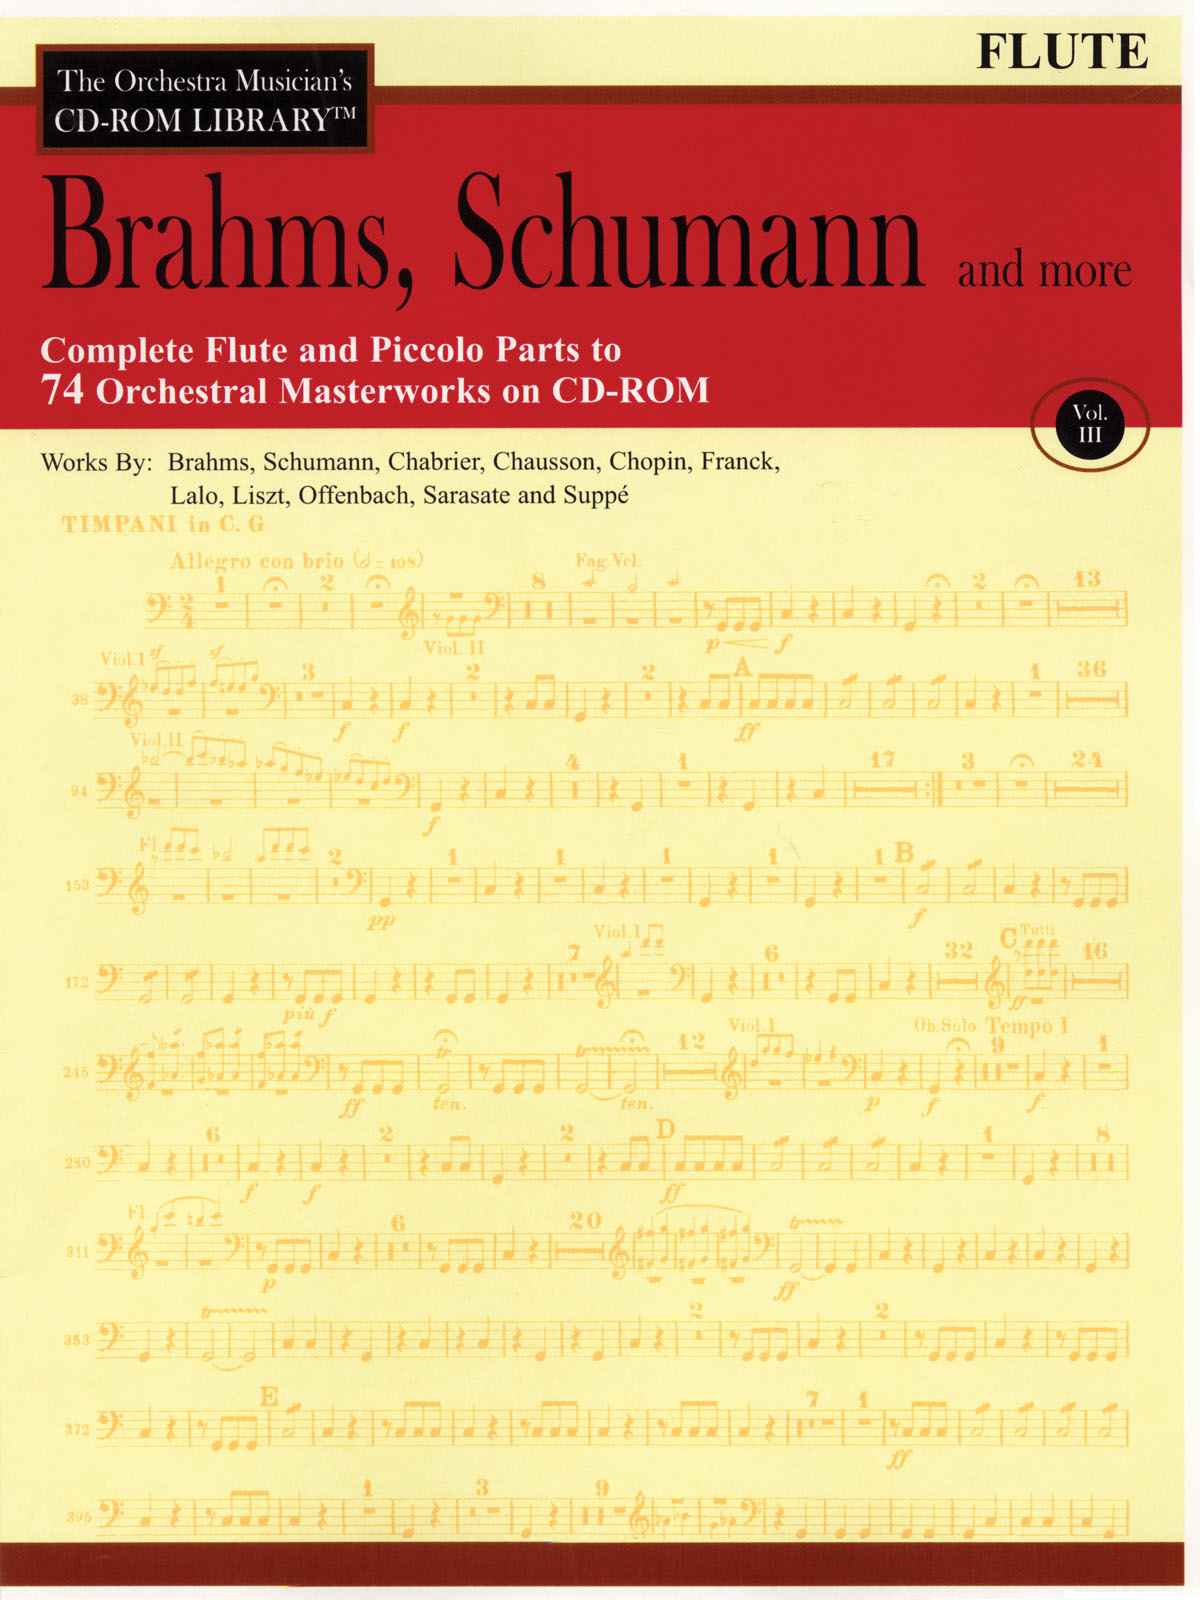 Brahms, Schumann & More – Volume 3(The Orchestra Musician’s CD-ROM Library – Flute)